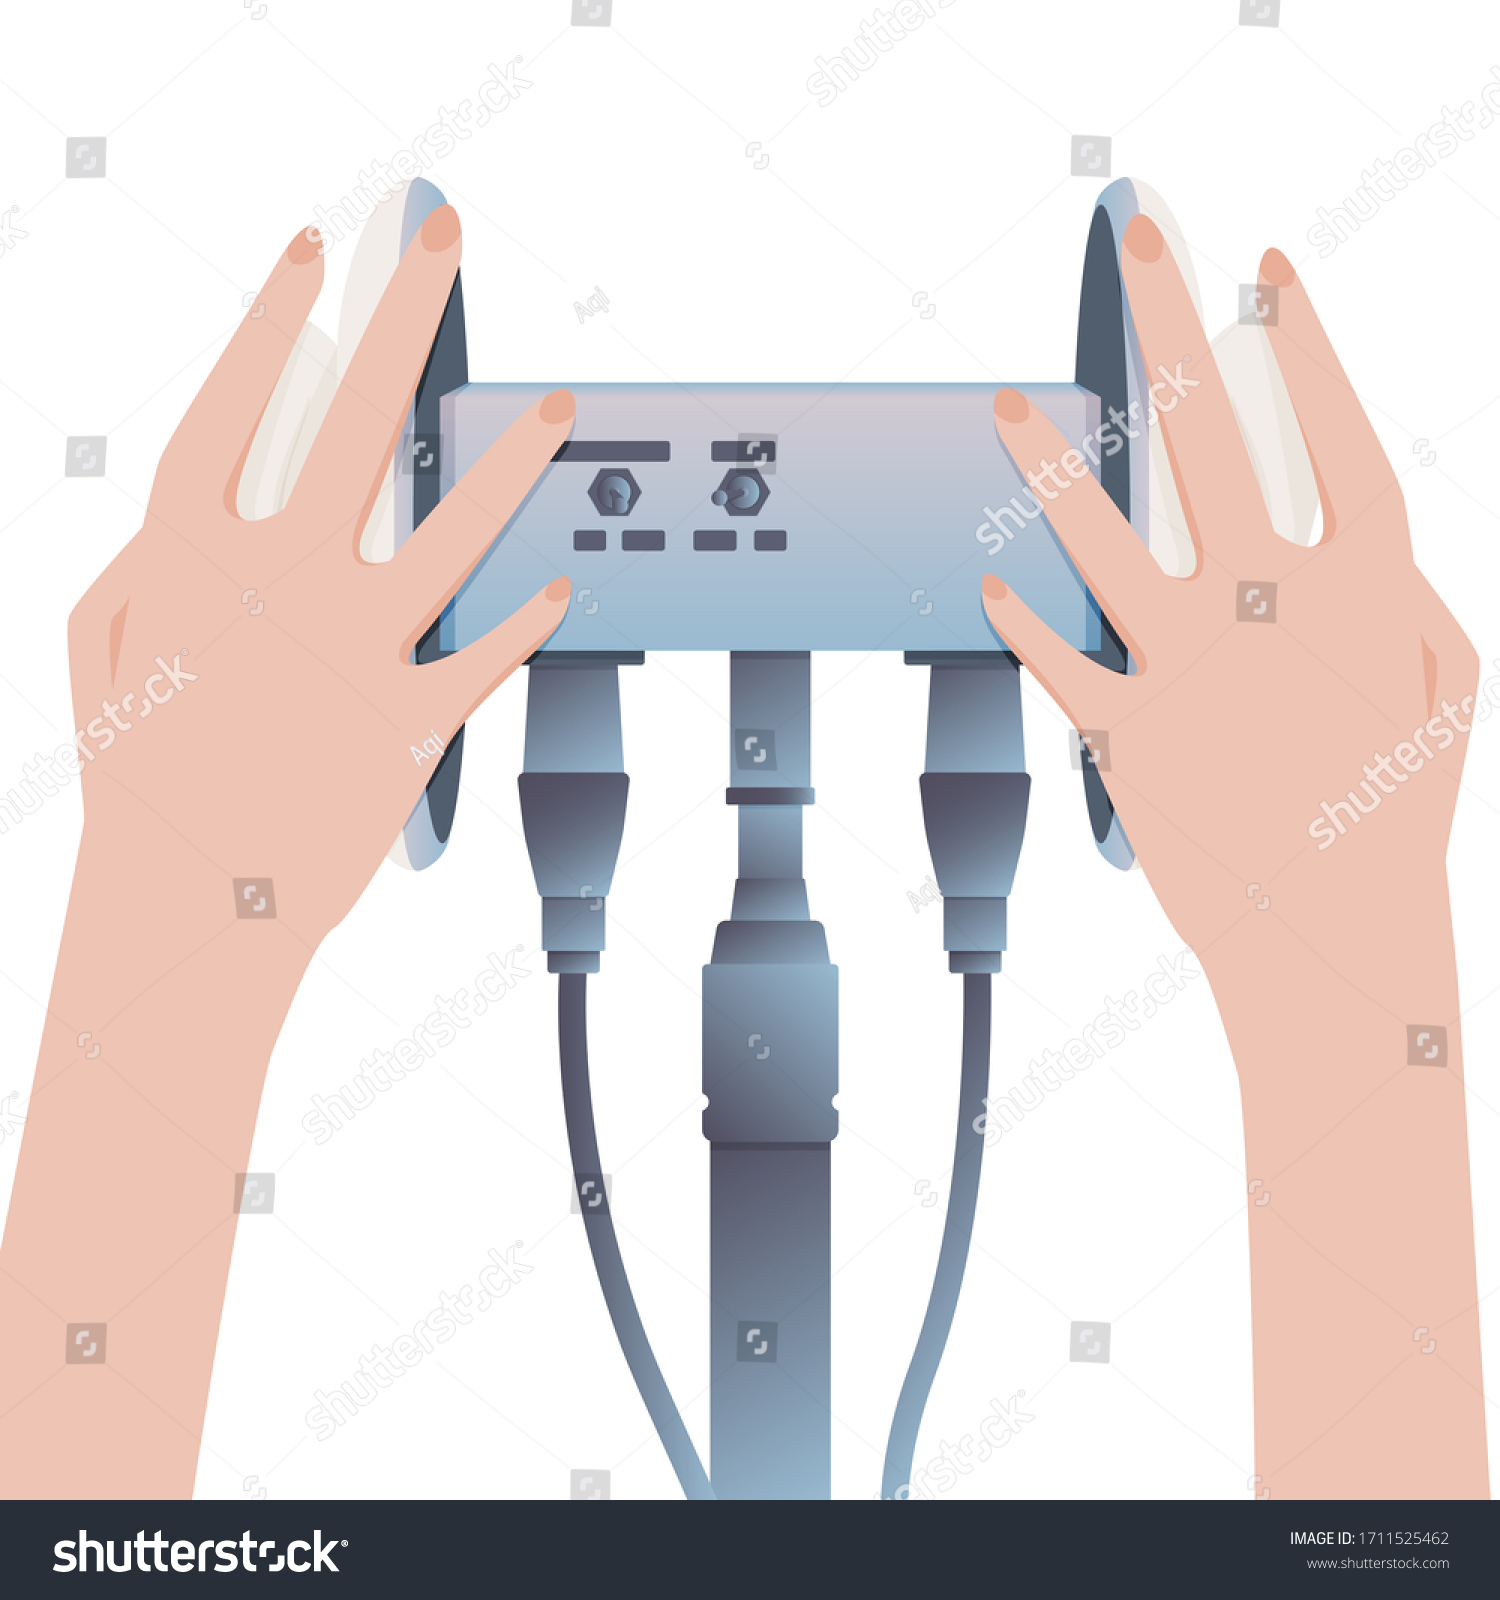 SVG of Concept of binaural microphone for ASMR with hands. Hands are touching sensors, triggers. Make massage, whisper, rustling. Autonomous sensory meridian response. Vector Illustration, isolated. svg